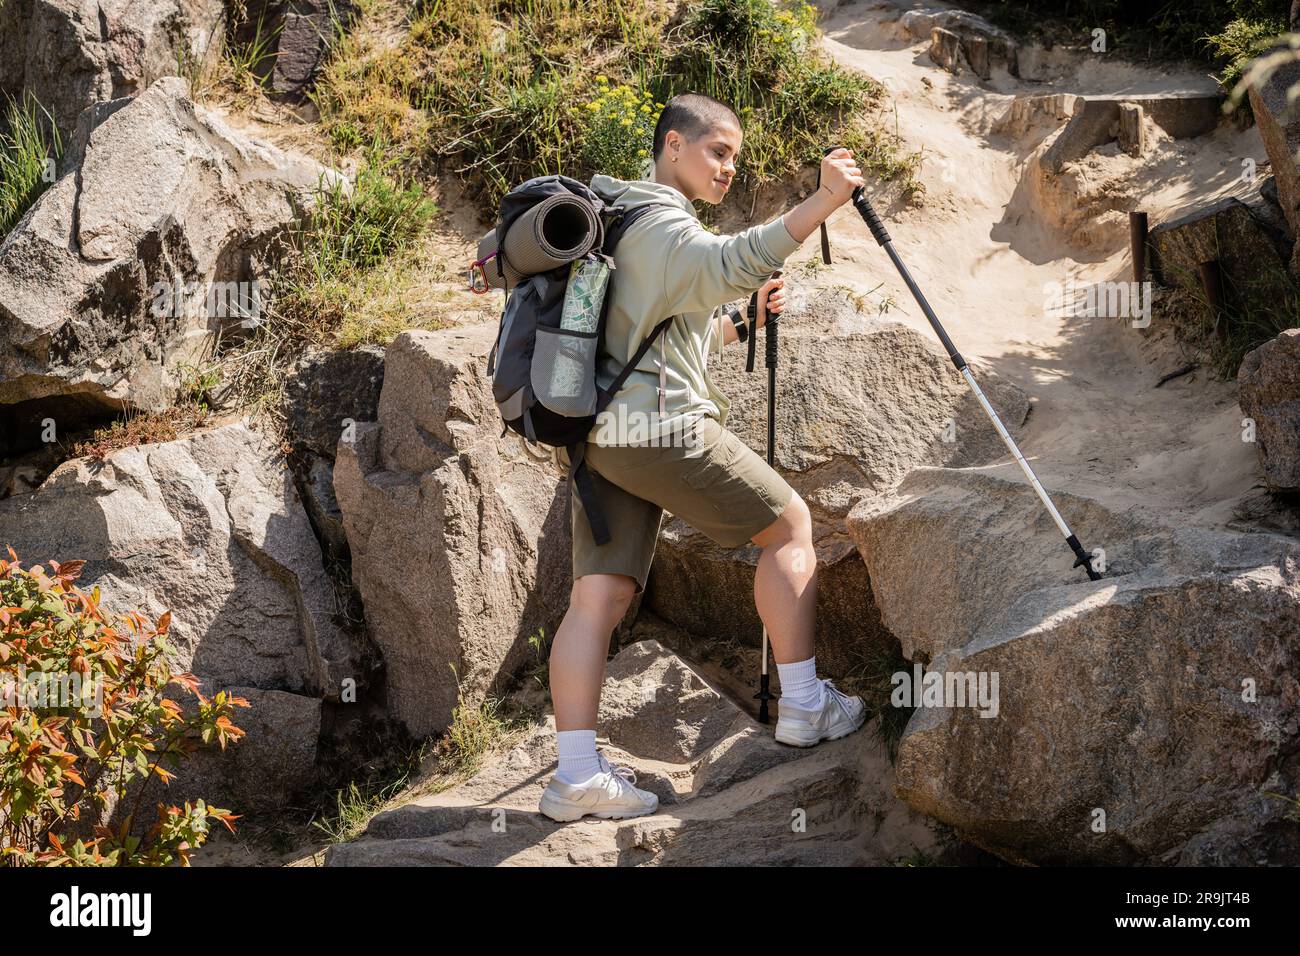 https://c8.alamy.com/comp/2R9JT4B/young-short-haired-female-traveler-in-casual-clothes-with-backpack-holding-trekking-poles-while-standing-near-hill-with-stones-at-background-during-su-2R9JT4B.jpg